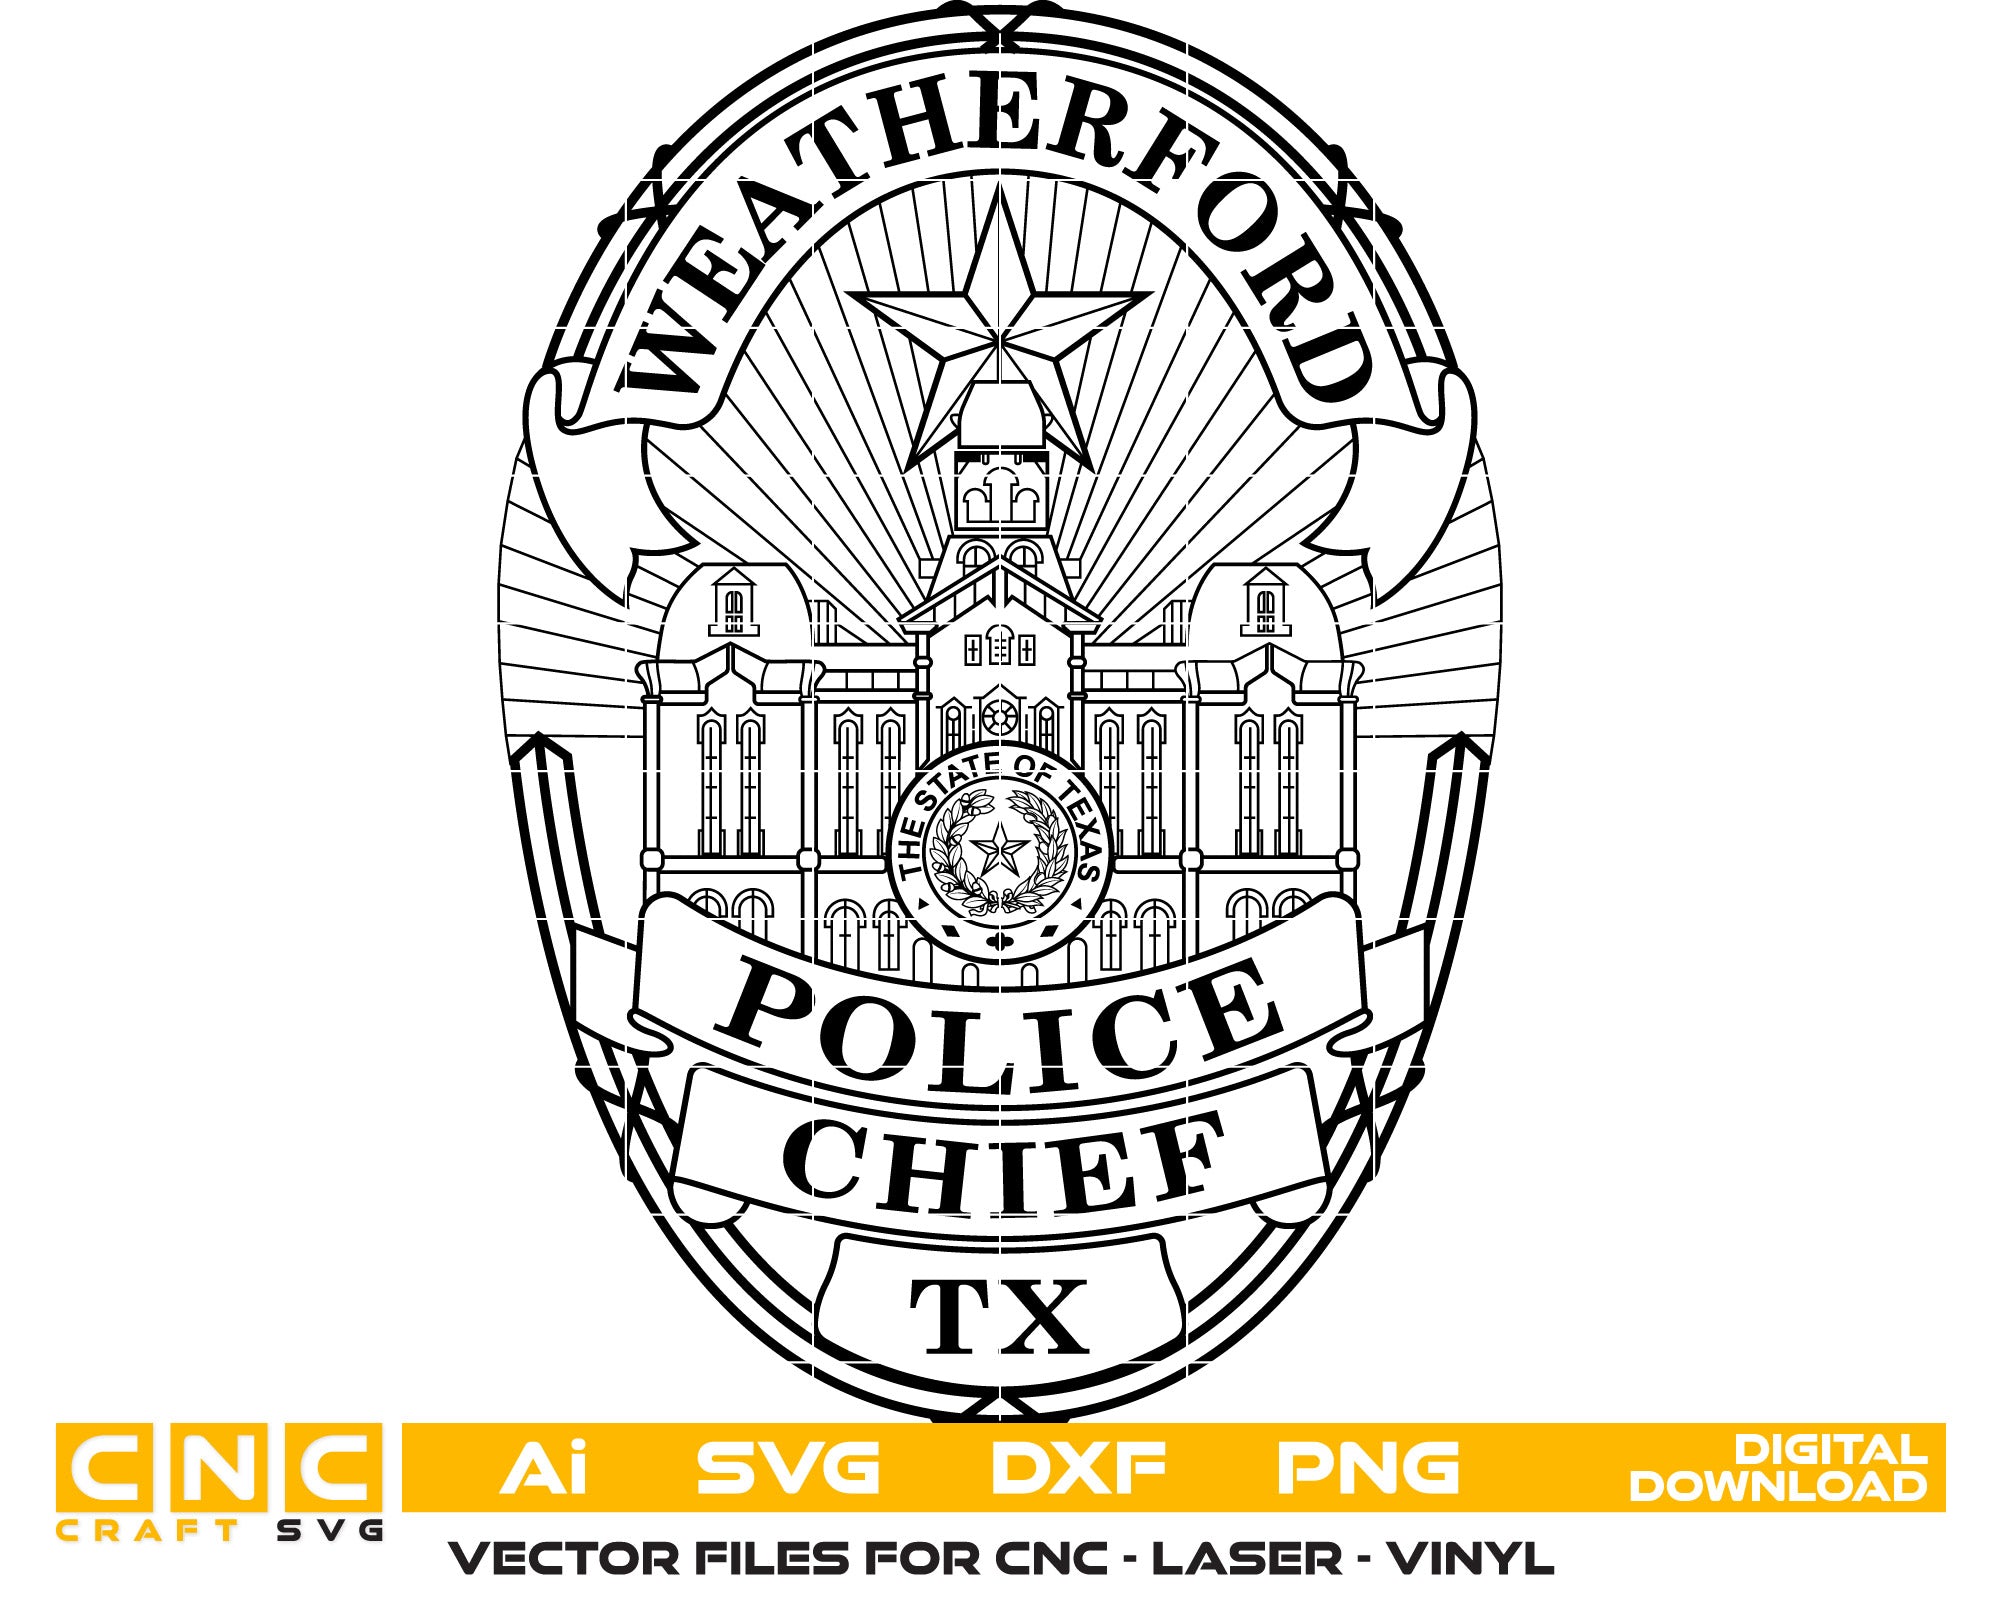 Weatherford Police Chief Badge vector art